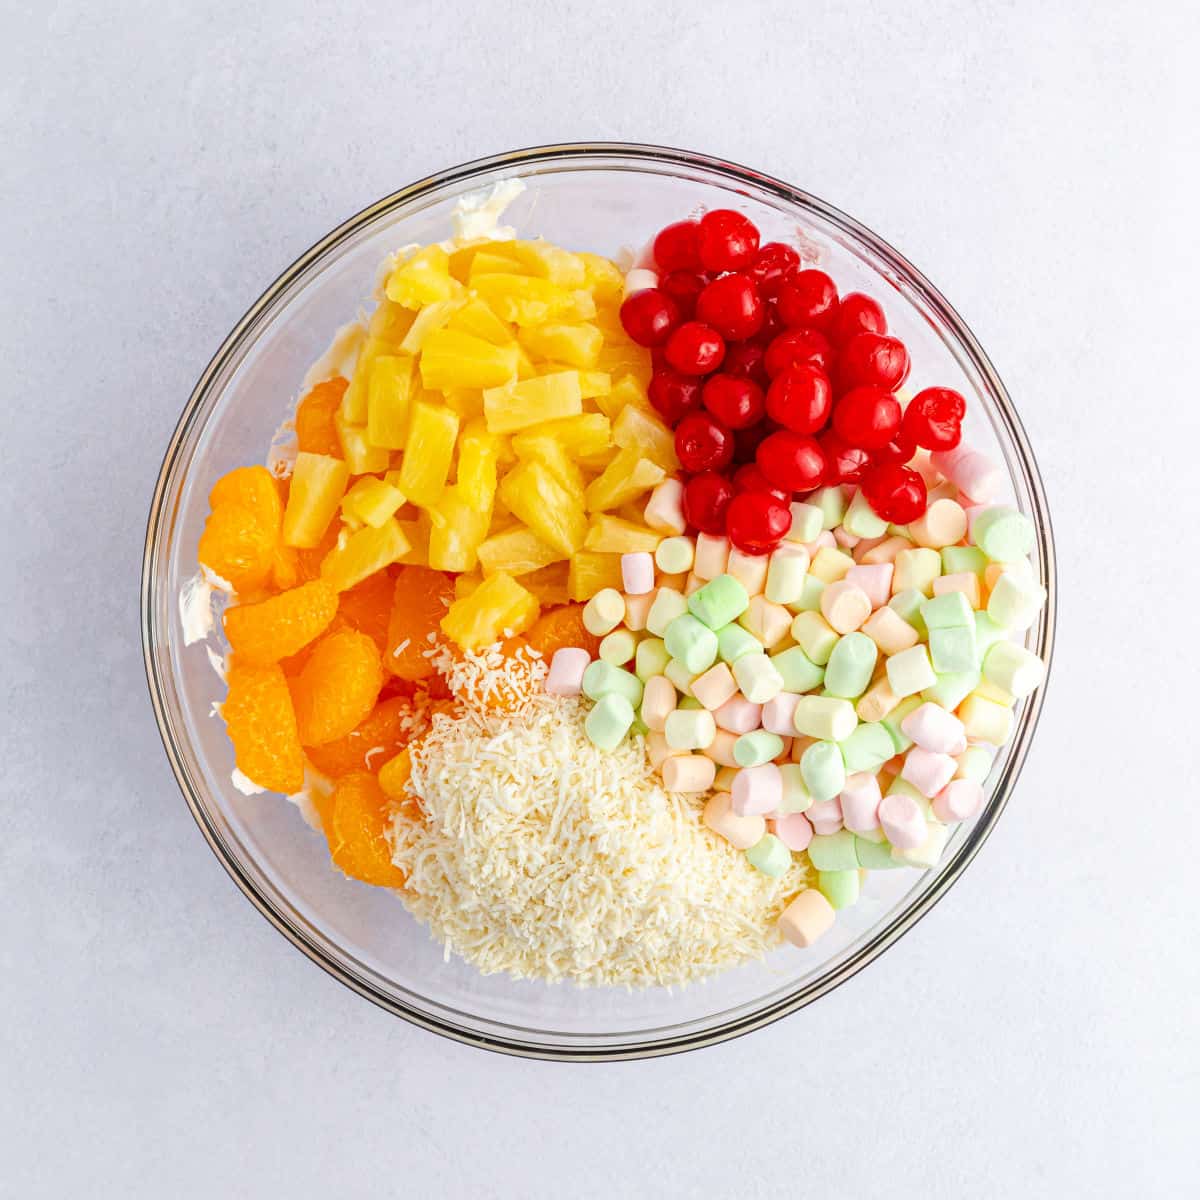 All the ambrosia salad ingredients added to a glass bowl.